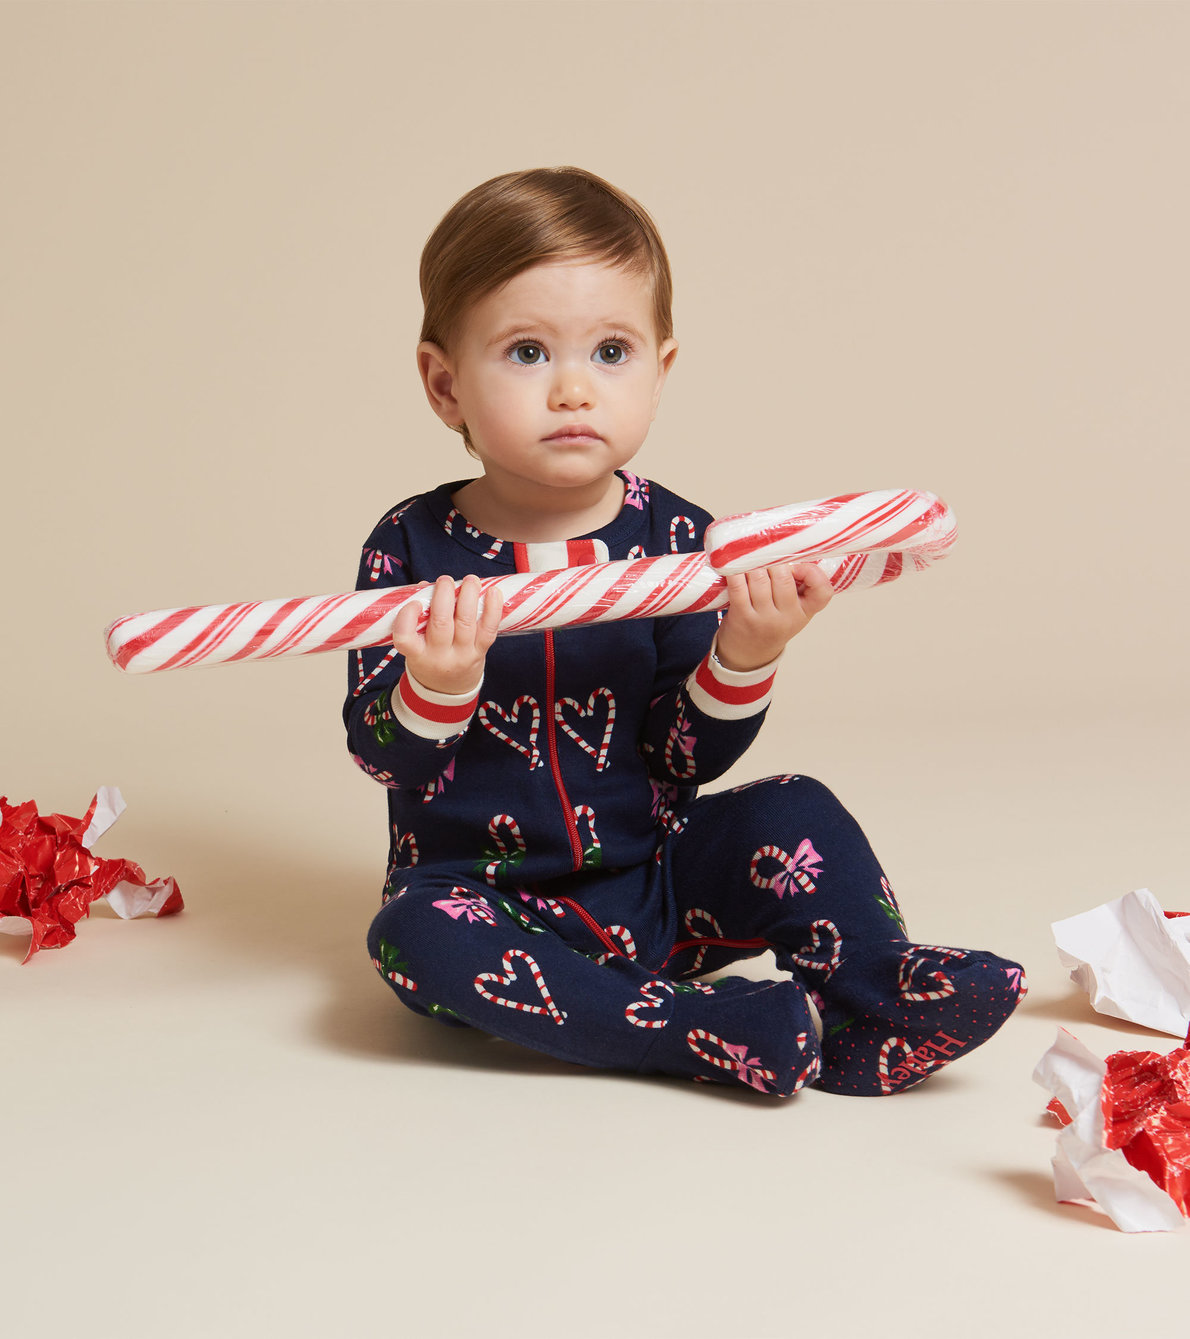 View larger image of Candy Cane Hearts Organic Cotton Footed Coverall